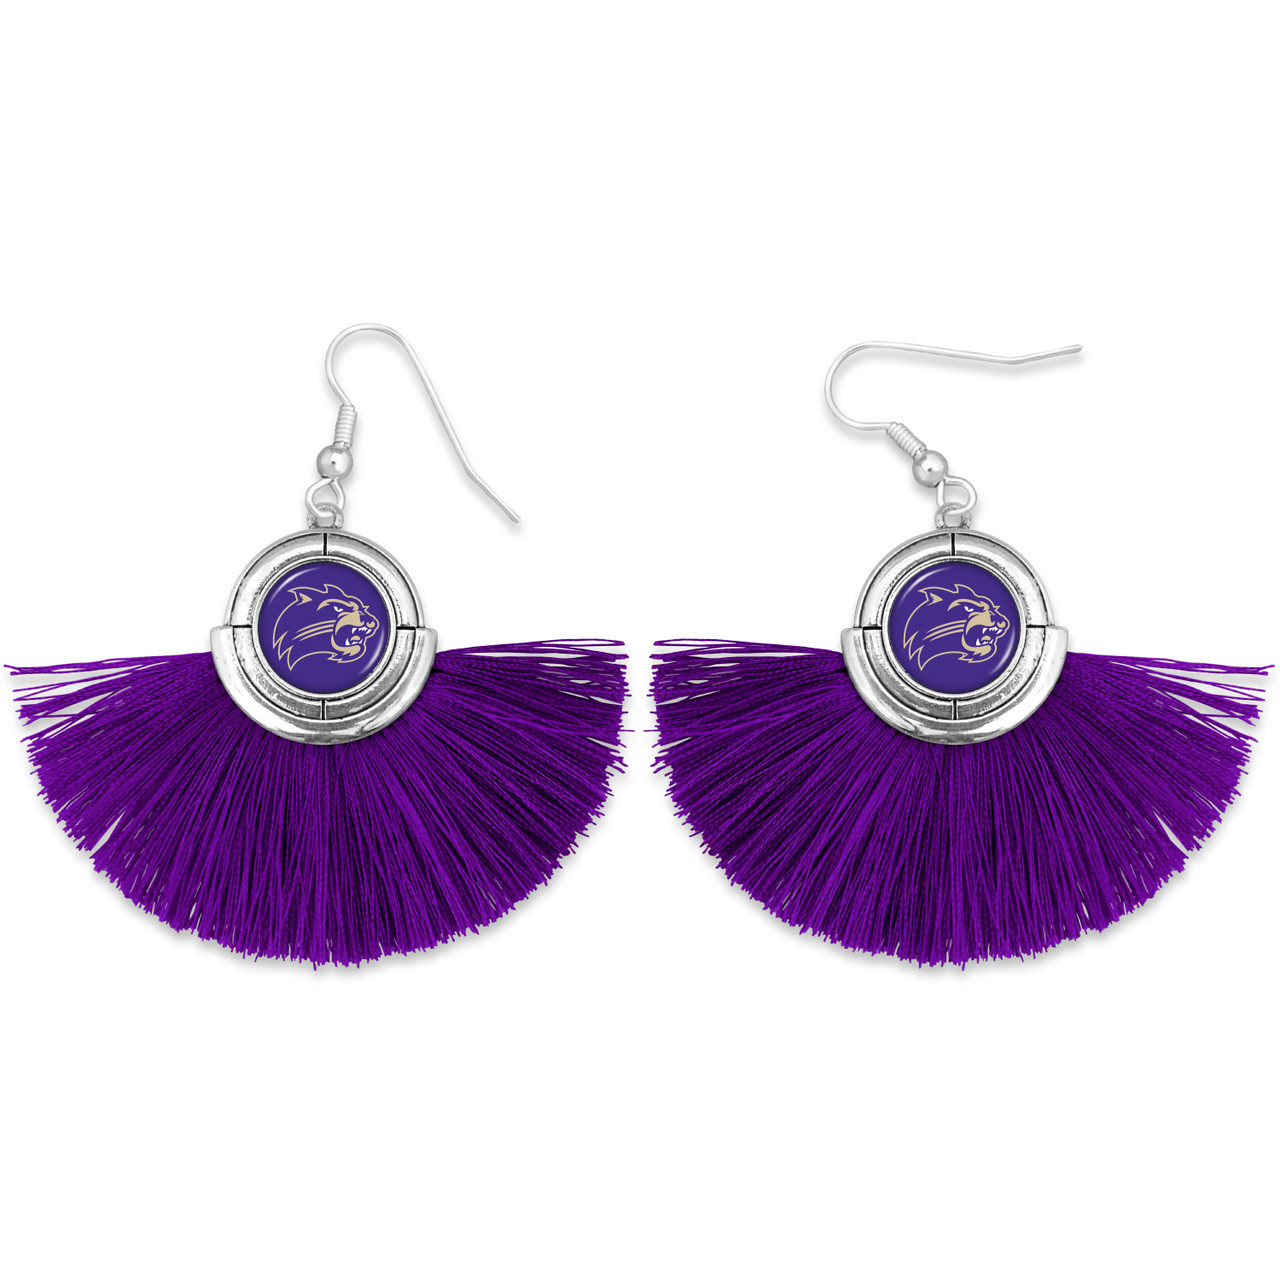 Western Carolina Catamounts Earrings- No Strings Attached